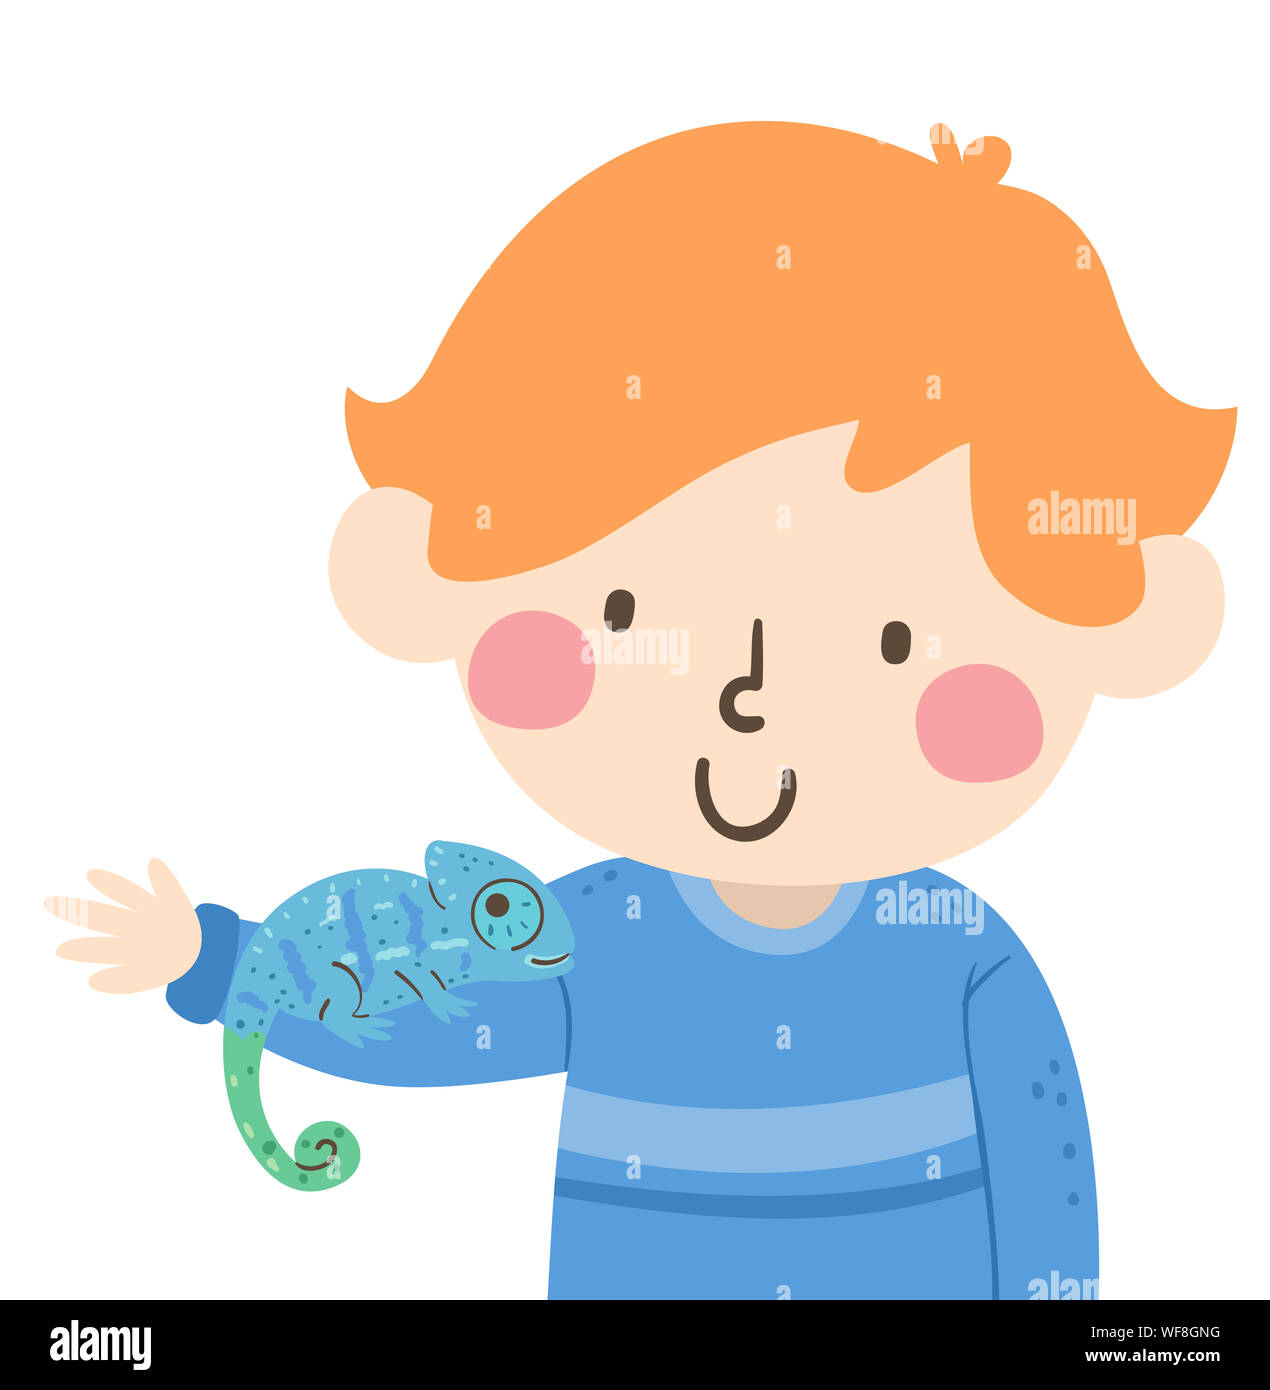 Illustration of a Kid Boy Looking at His Pet Chameleon On His Arm Blending with the Color of His Clothes Stock Photo